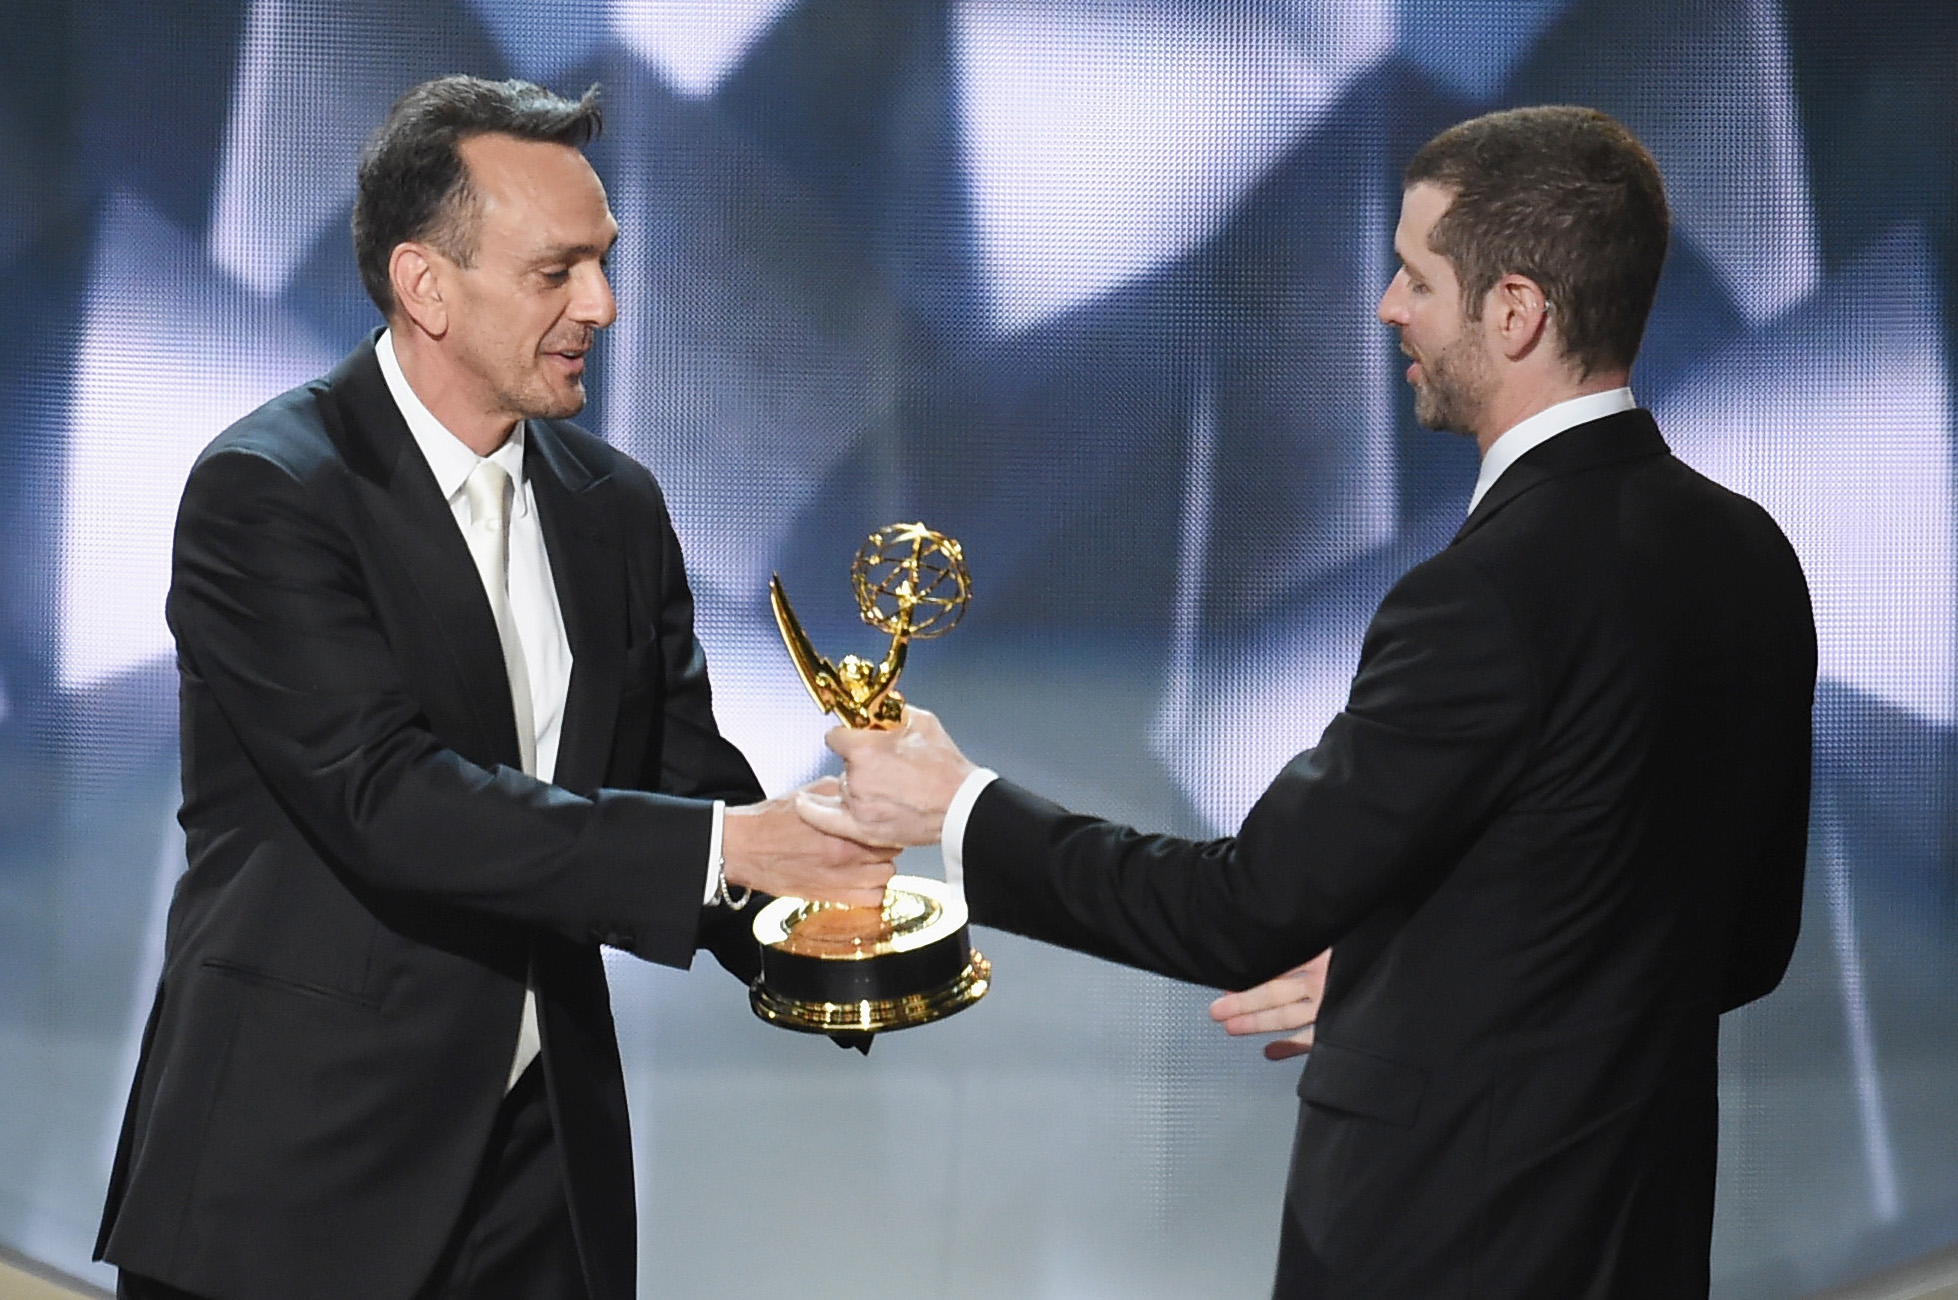 LOS ANGELES, CA - SEPTEMBER 18: Writer/producer D.B. Weiss (R) accepts Outstanding Writing for a Drama Series for 'Game of Thrones' episode 'Battle of the Bastards' from actor Hank Azaria (L) onstage during the 68th Annual Primetime Emmy Awards at Microsoft Theater on September 18, 2016 in Los Angeles, California.   Kevin Winter/Getty Images/AFP